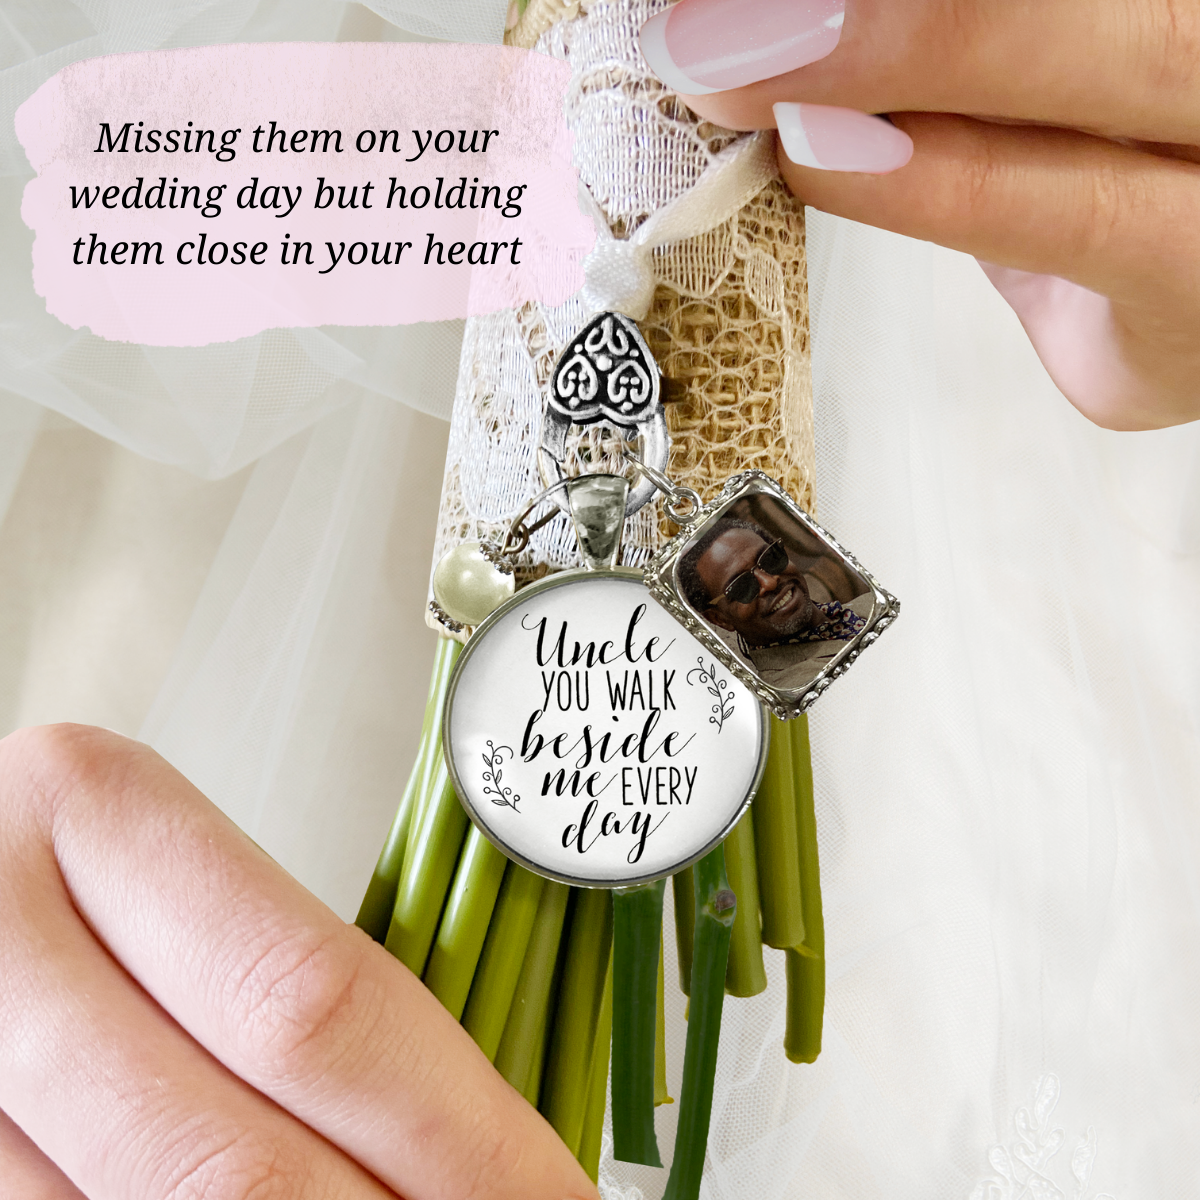 Bouquet Charm Customize Uncle You Walk Beside Me Every Day Wedding Day Jewelry Memory Vintage Silvertone Glass Pendant  Loving Memorial on Bride's Flowers DIY Photo Template  Bouquet Charm - Gutsy Goodness Handmade Jewelry